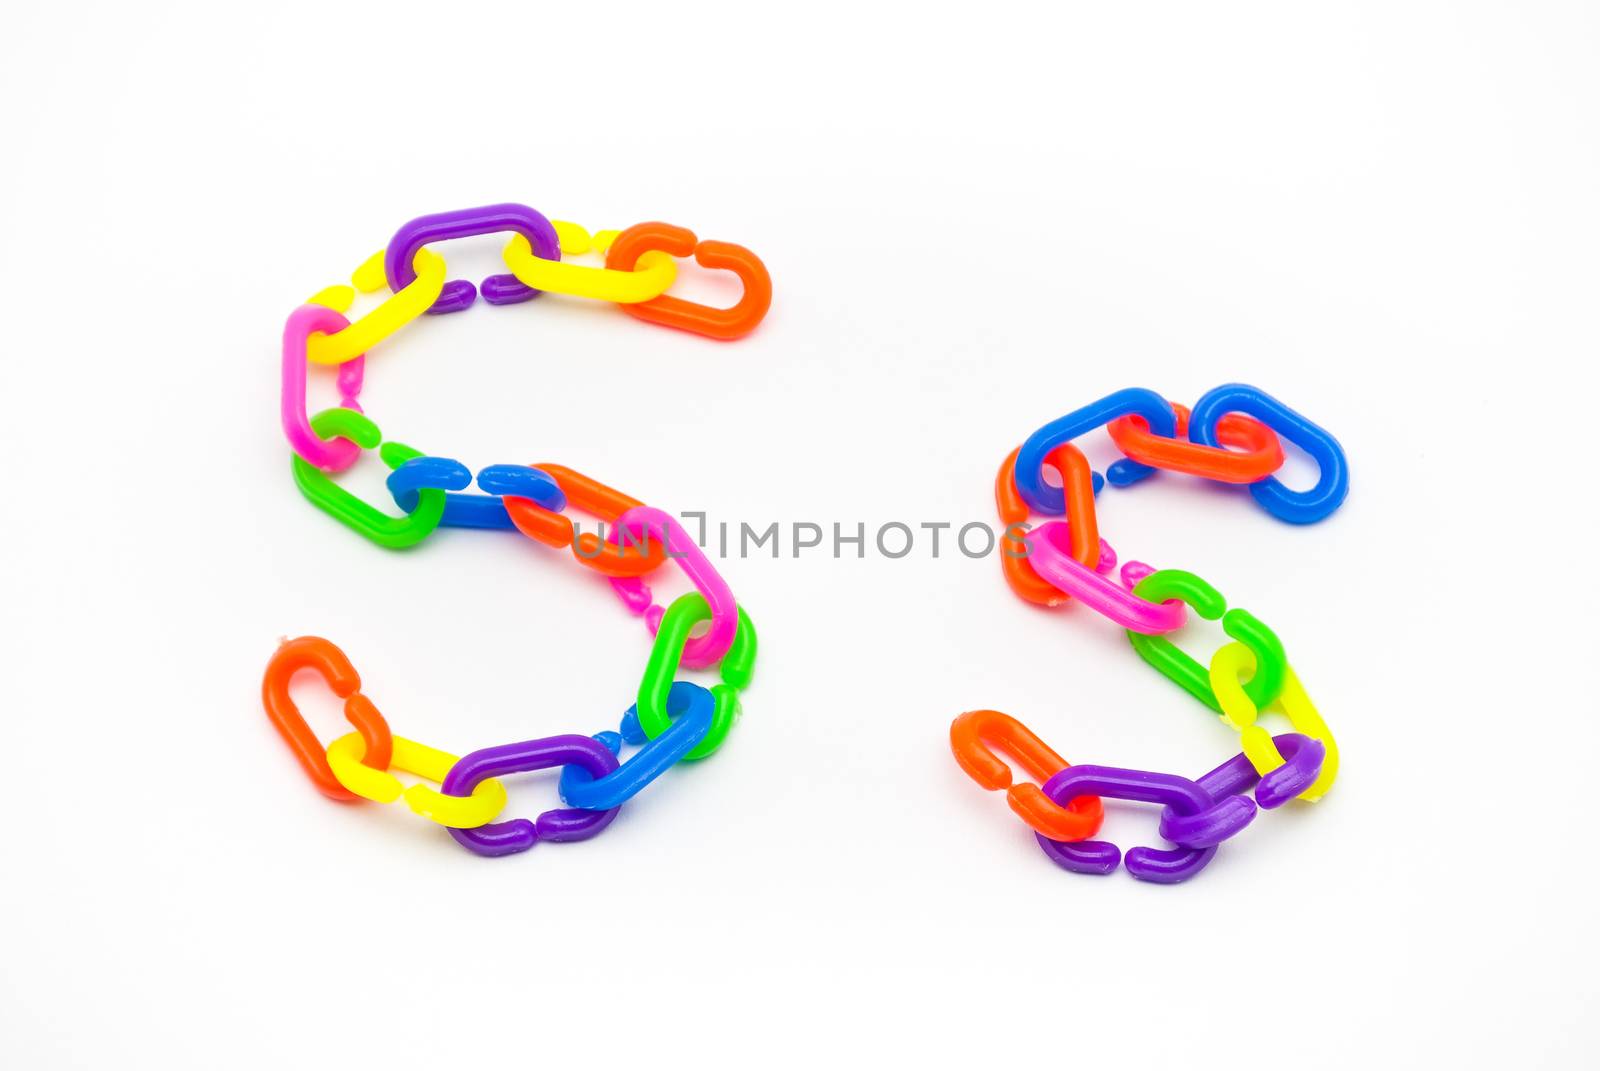 S and s Alphabet, Created by Colorful Plastic Chain.